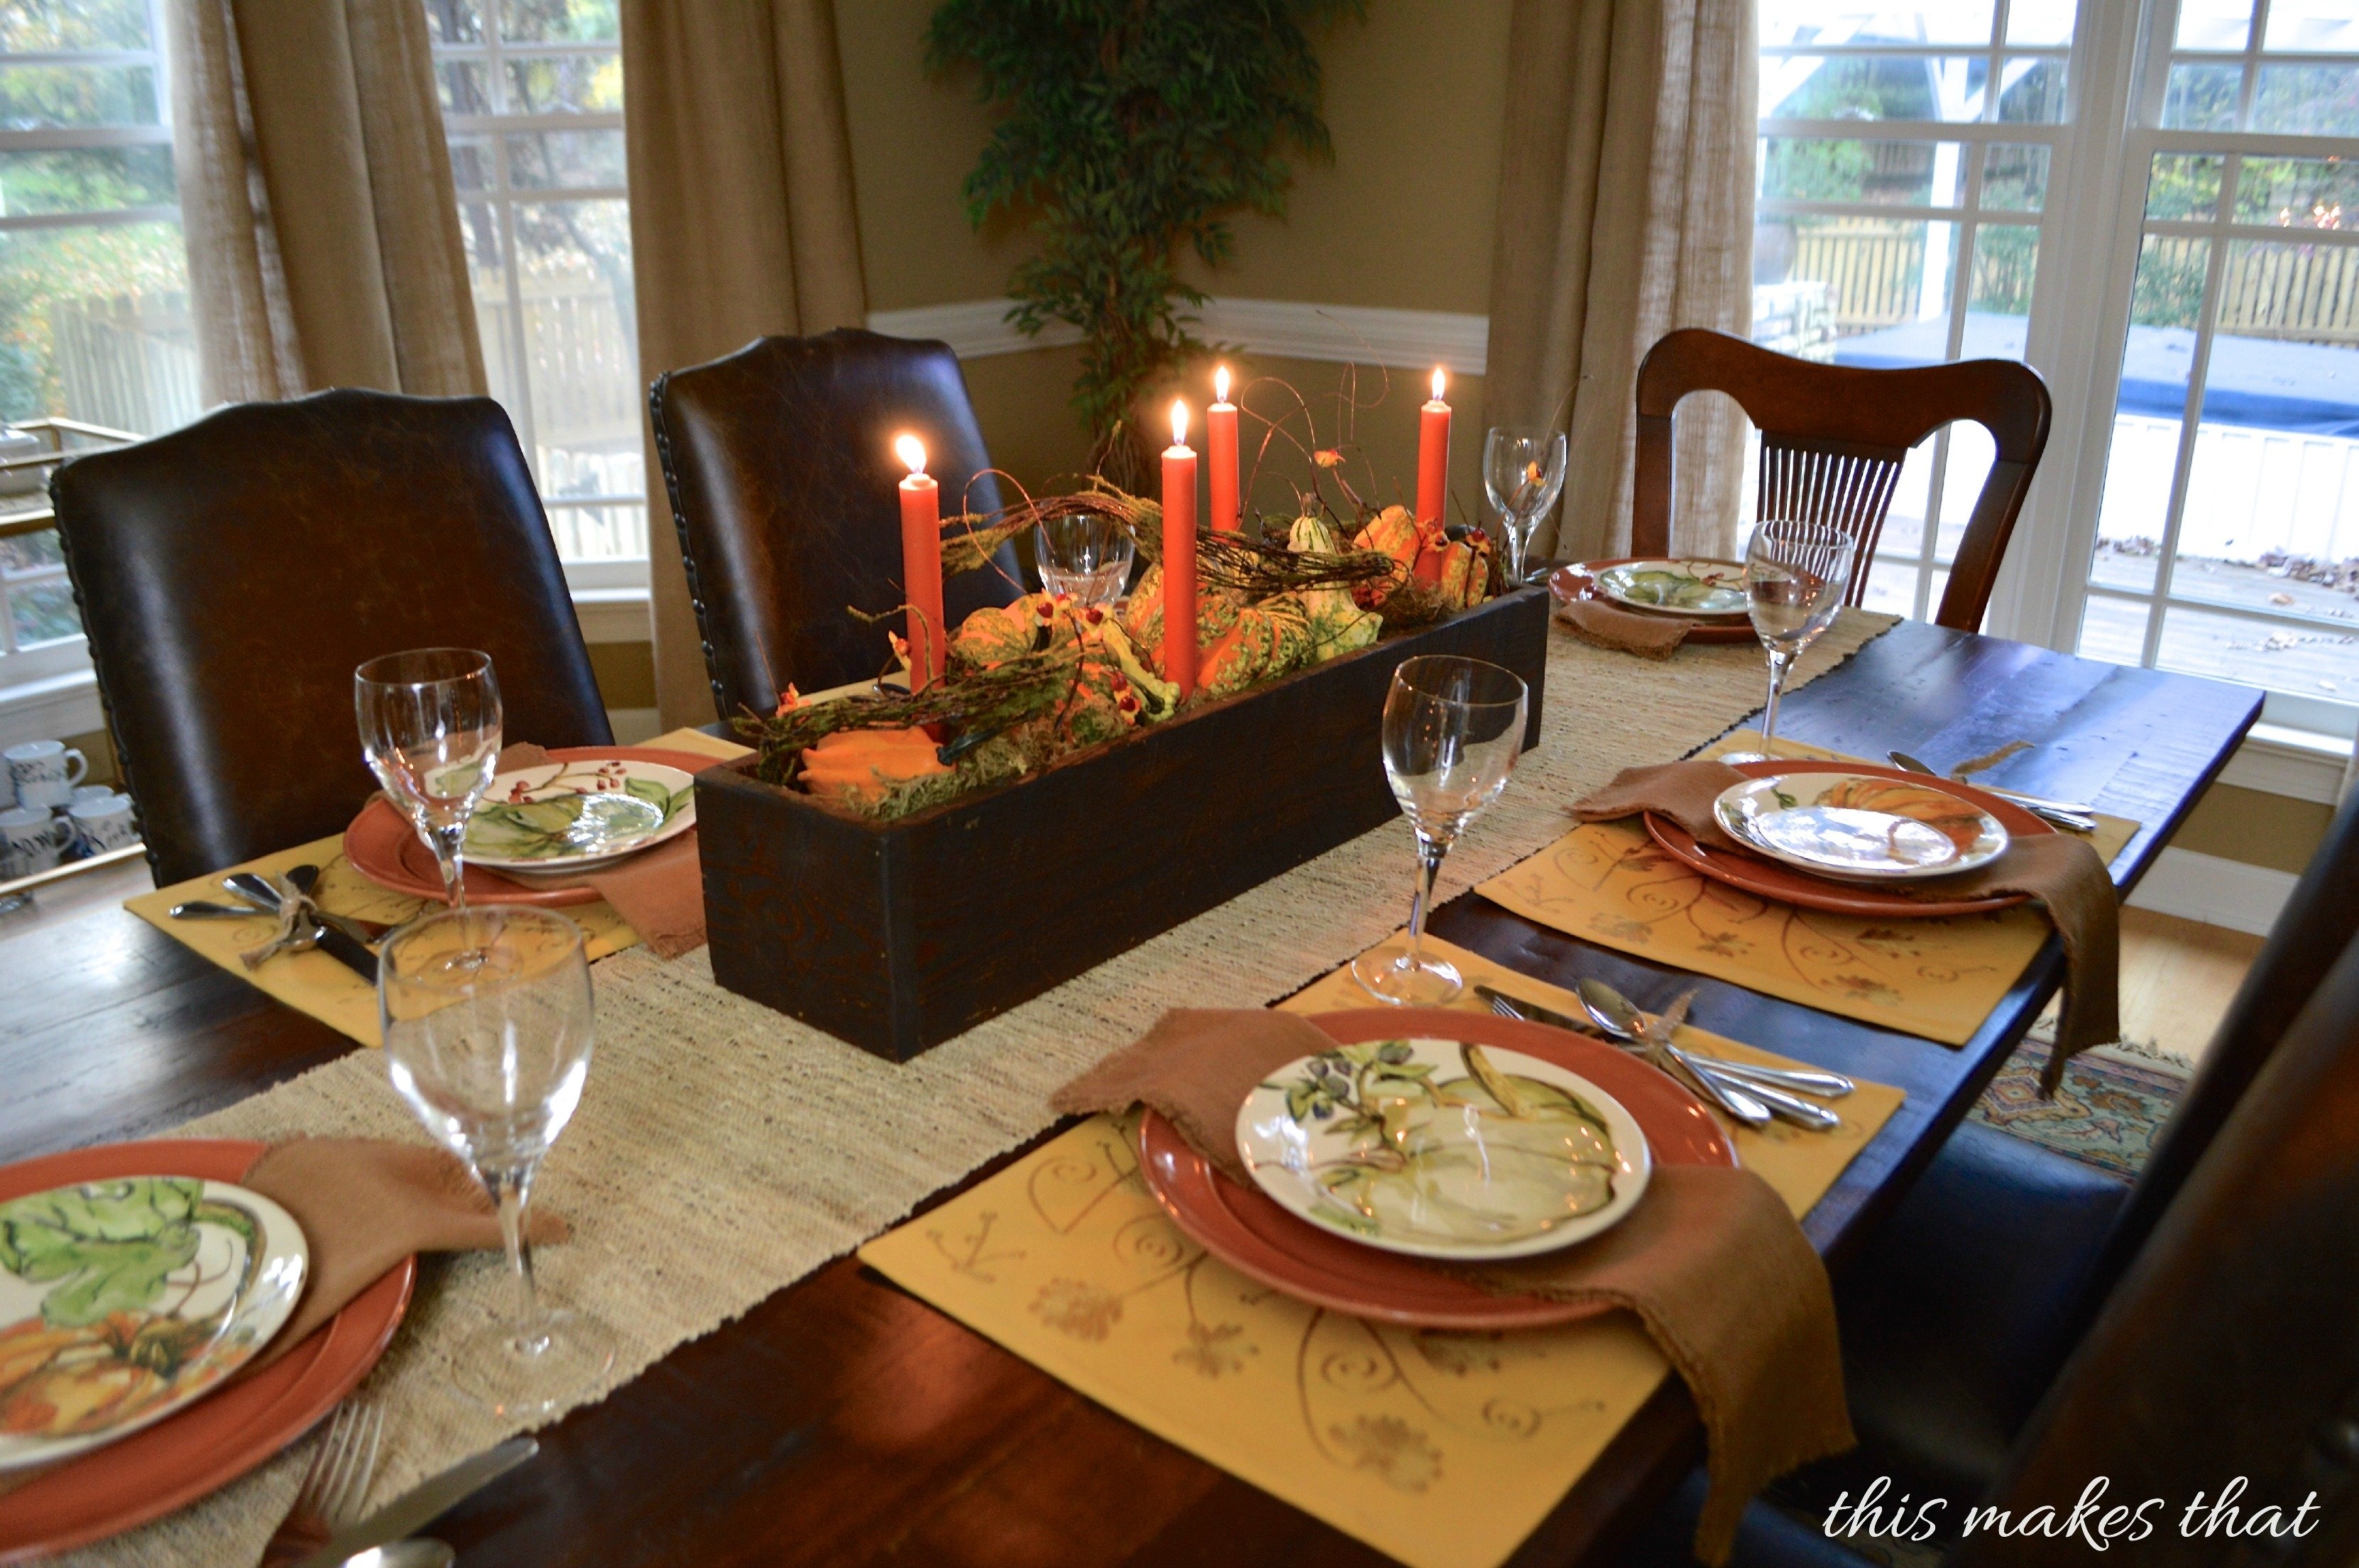 10 Attractive Table Setting Ideas For Thanksgiving thanksgiving table setting ideas this makes that 2022